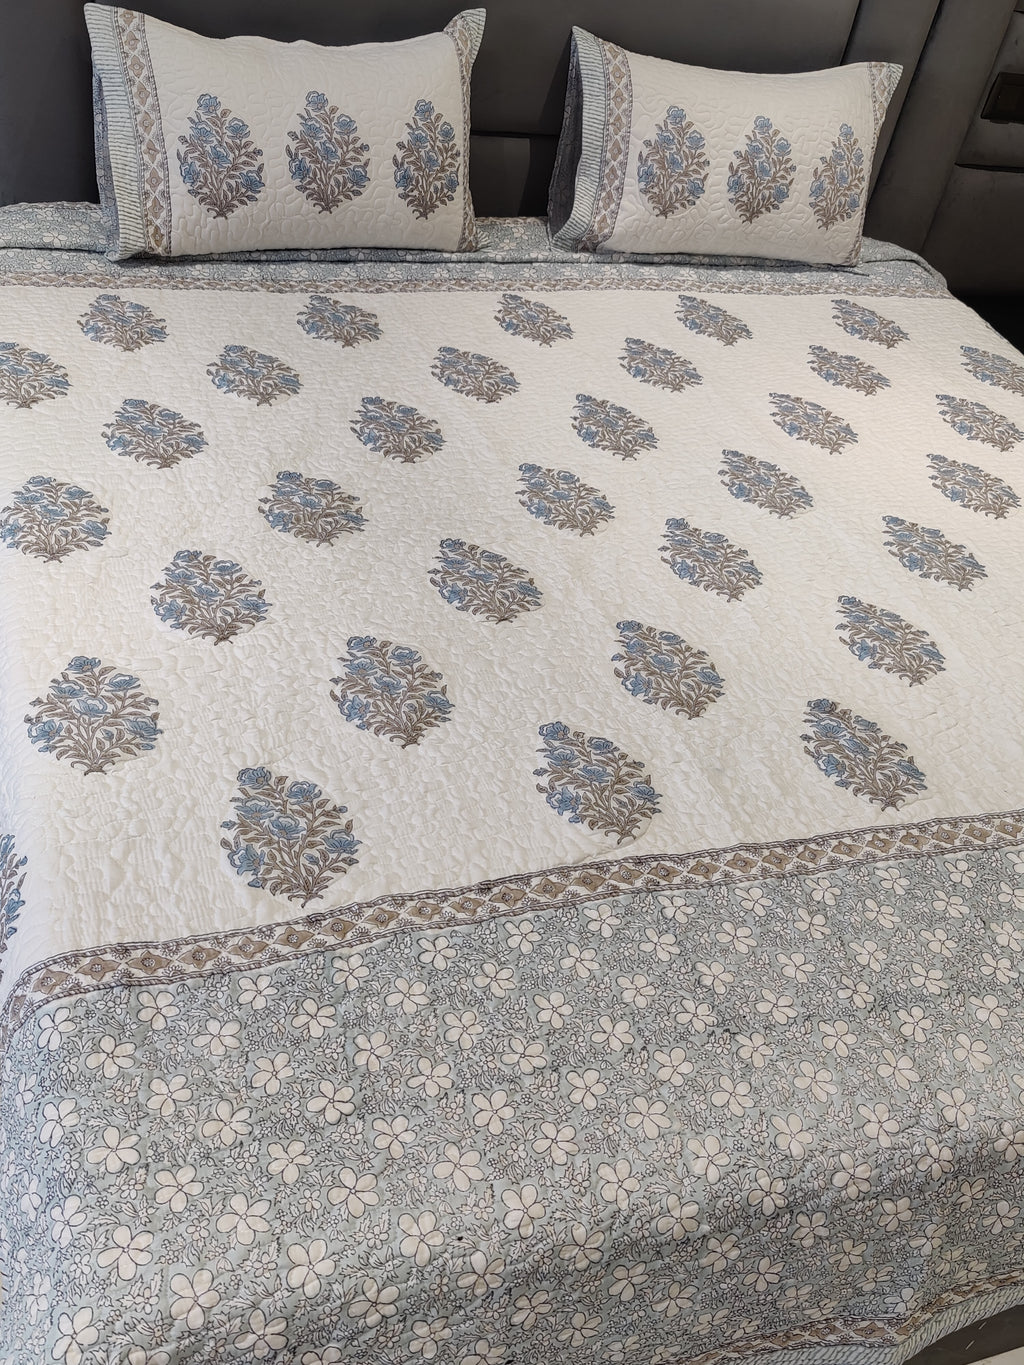 DISHA HANDBLOCK PRINTED QUILTED BEDCOVER